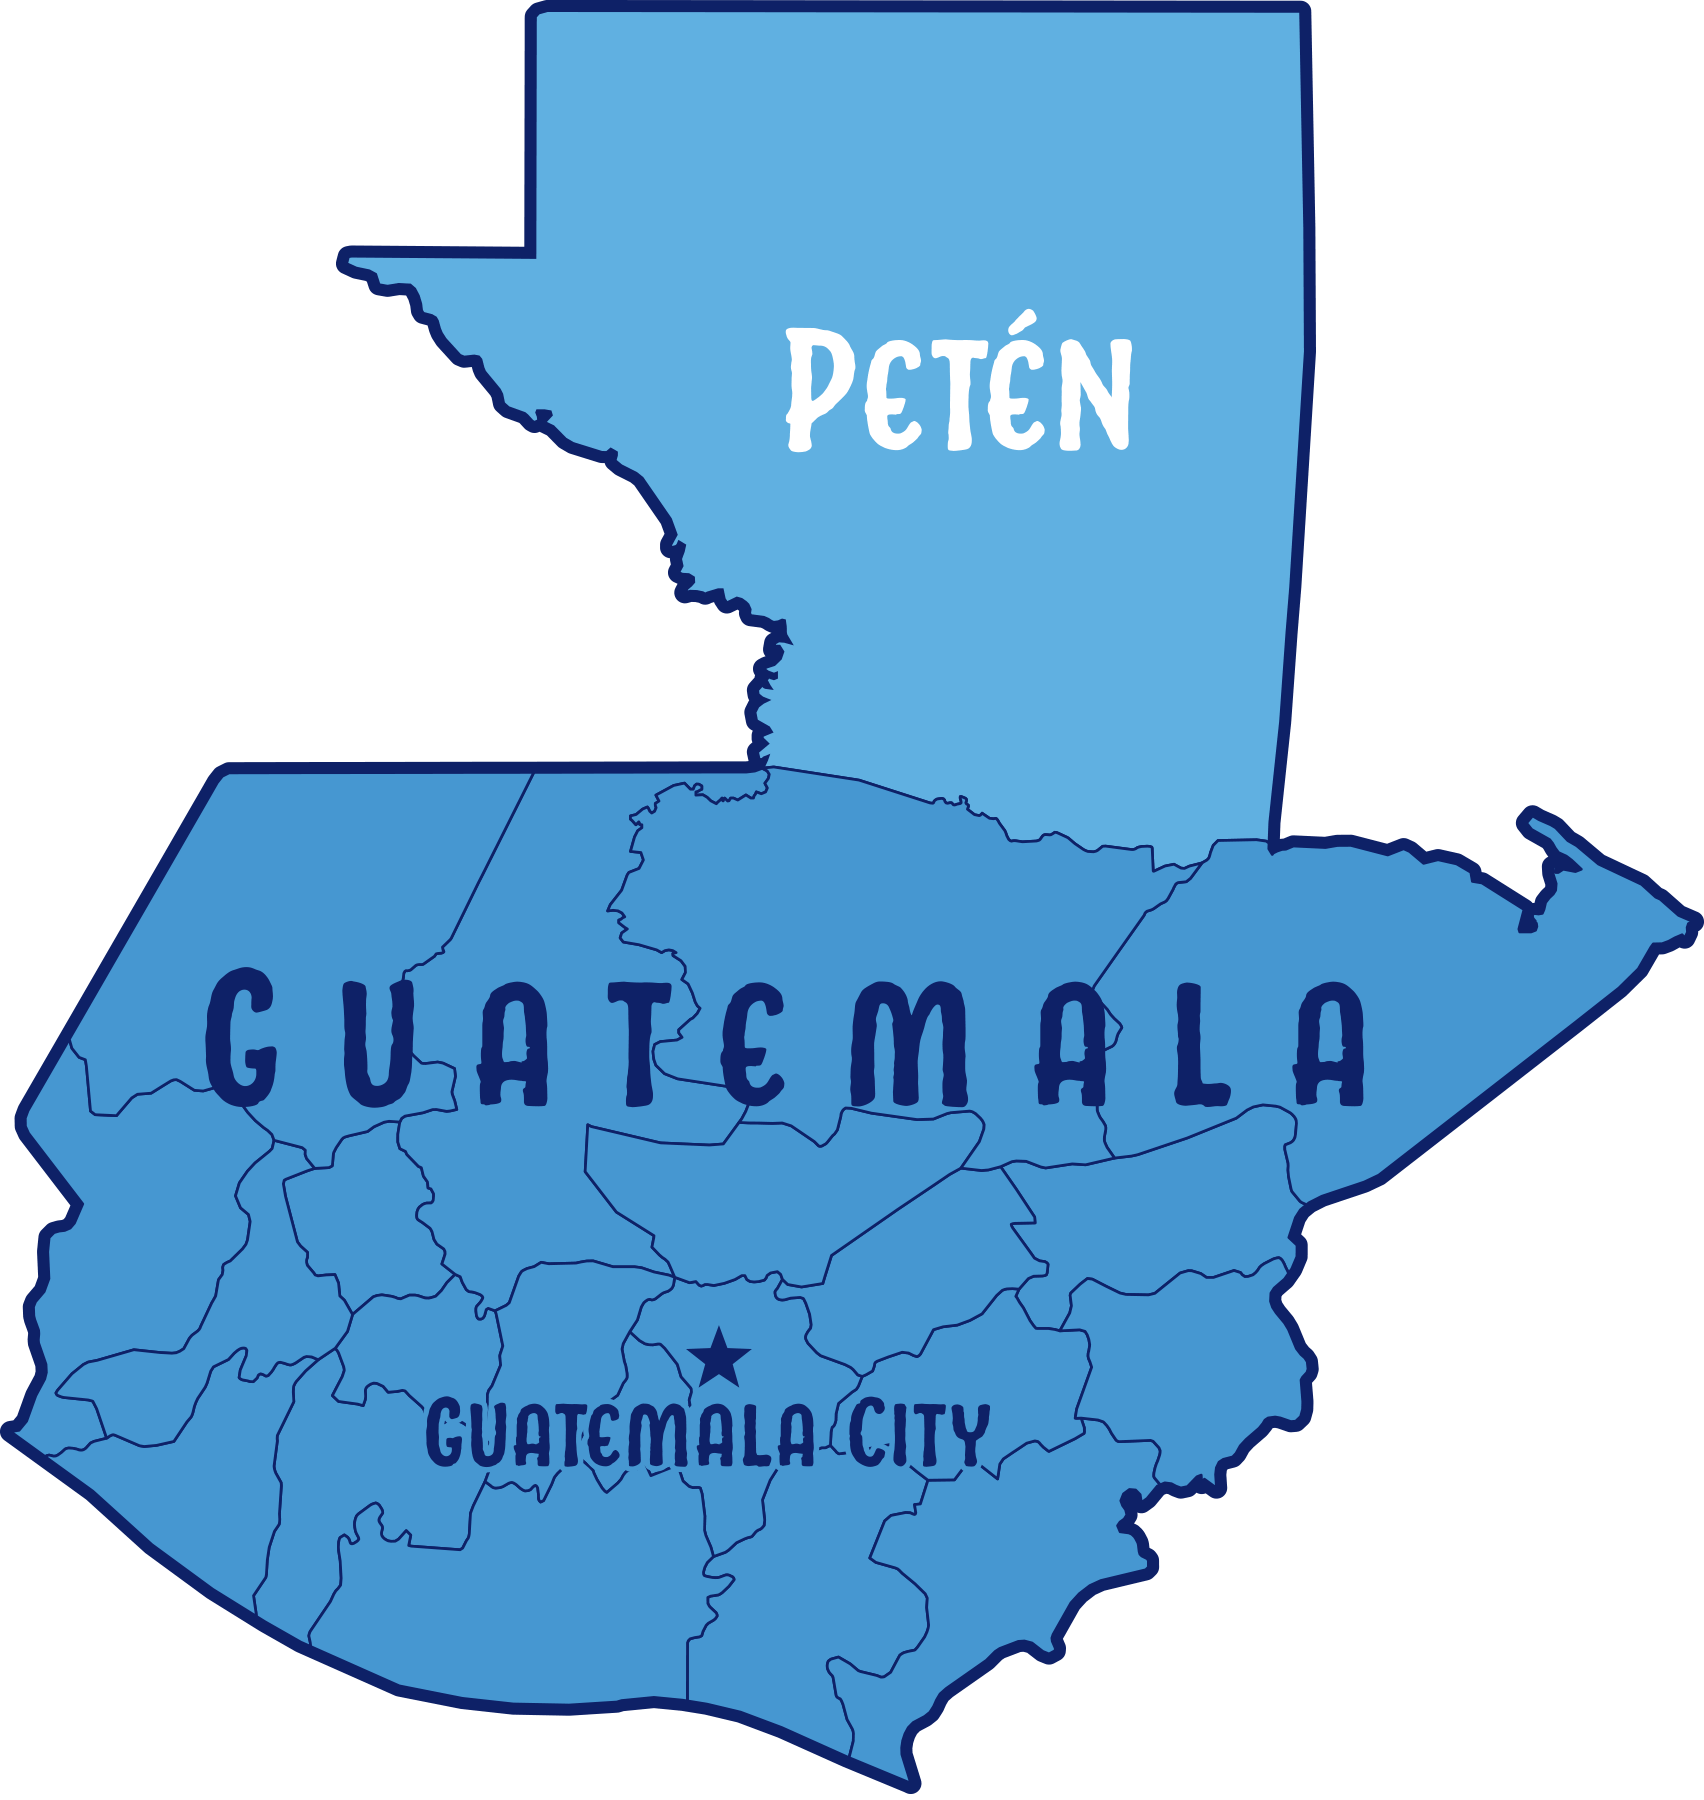 Map of Guatemala showing Petén in the north